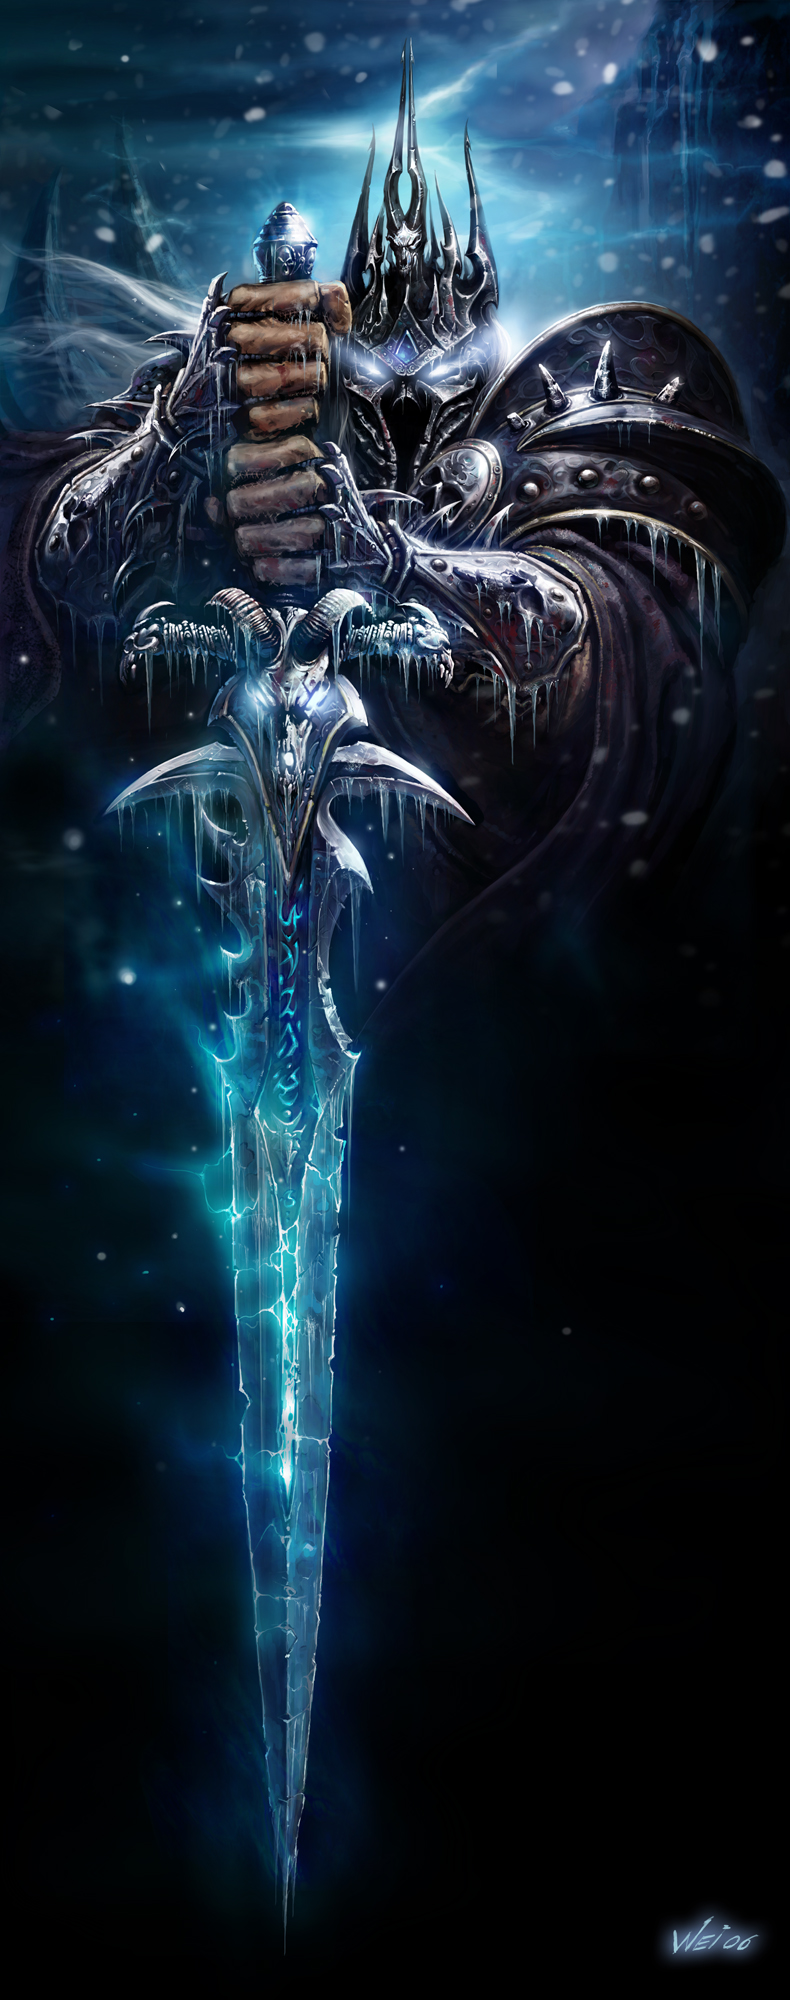 Арт к игре World of Warcraft: Wrath of the Lich King